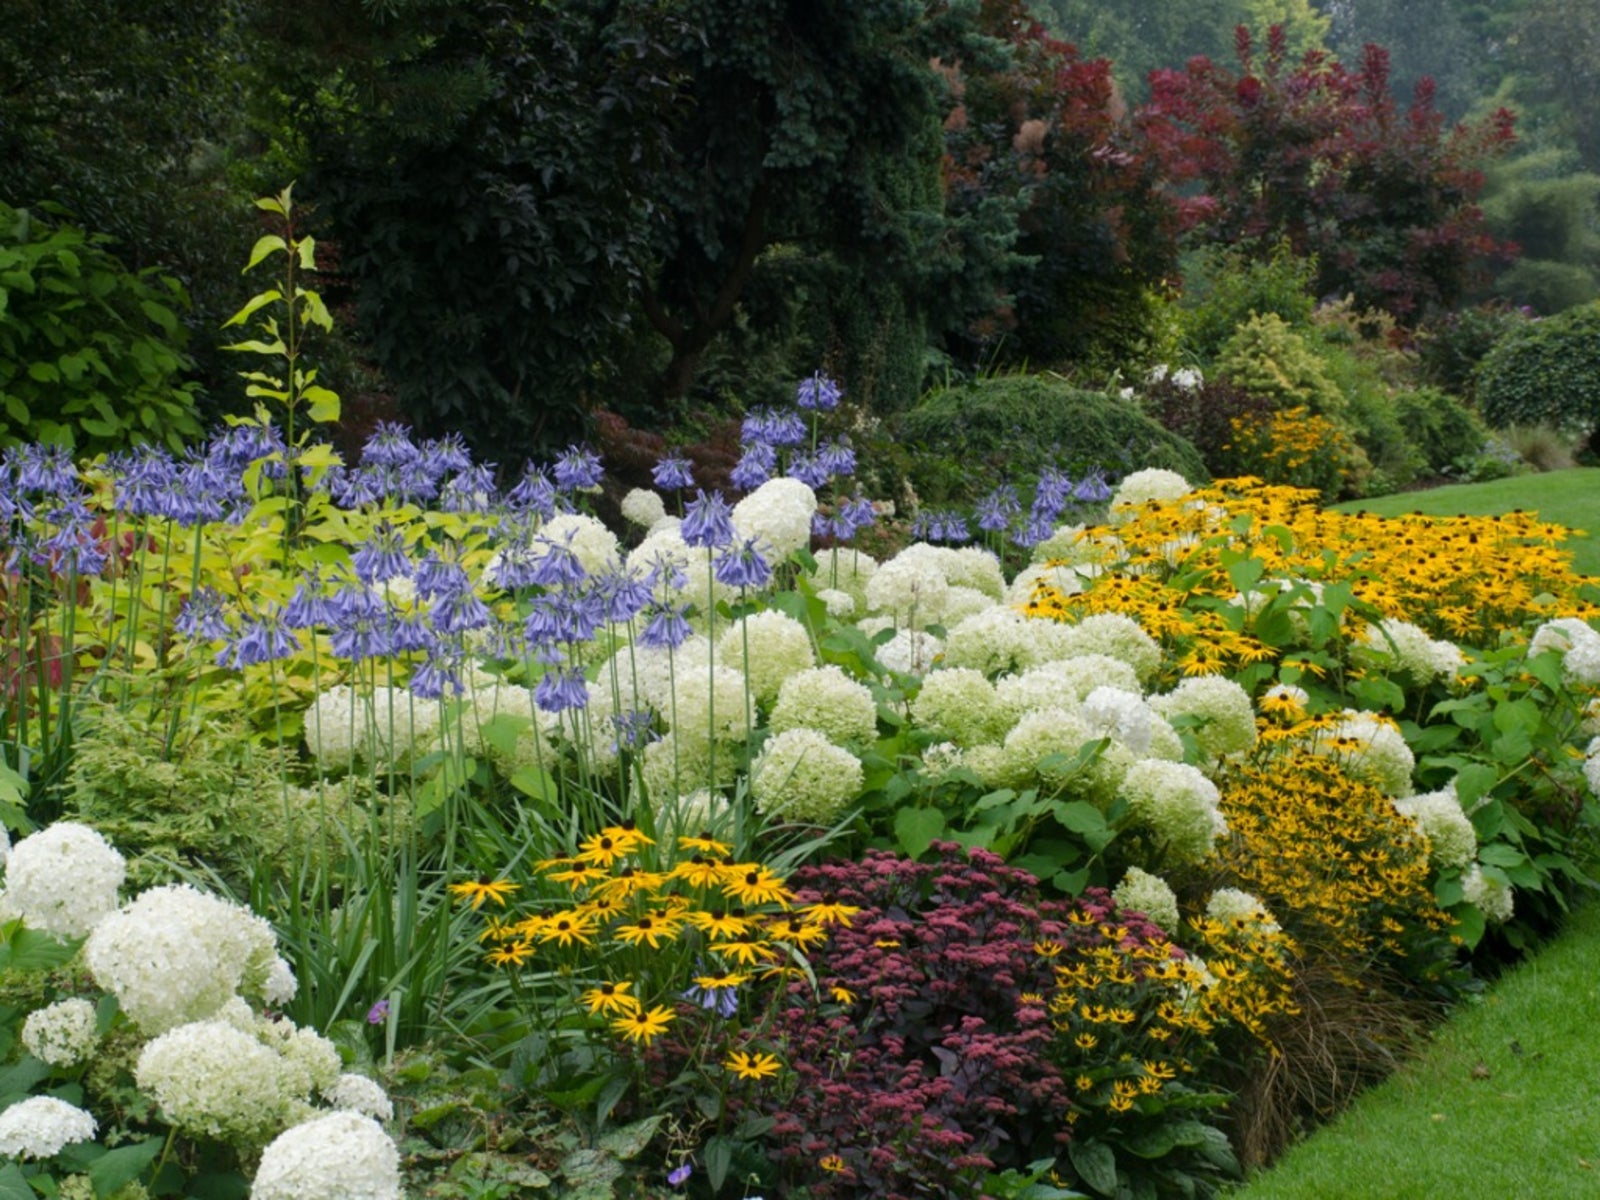 How To Build A Flower Bed Starting, How To Make A Perennial Garden Design